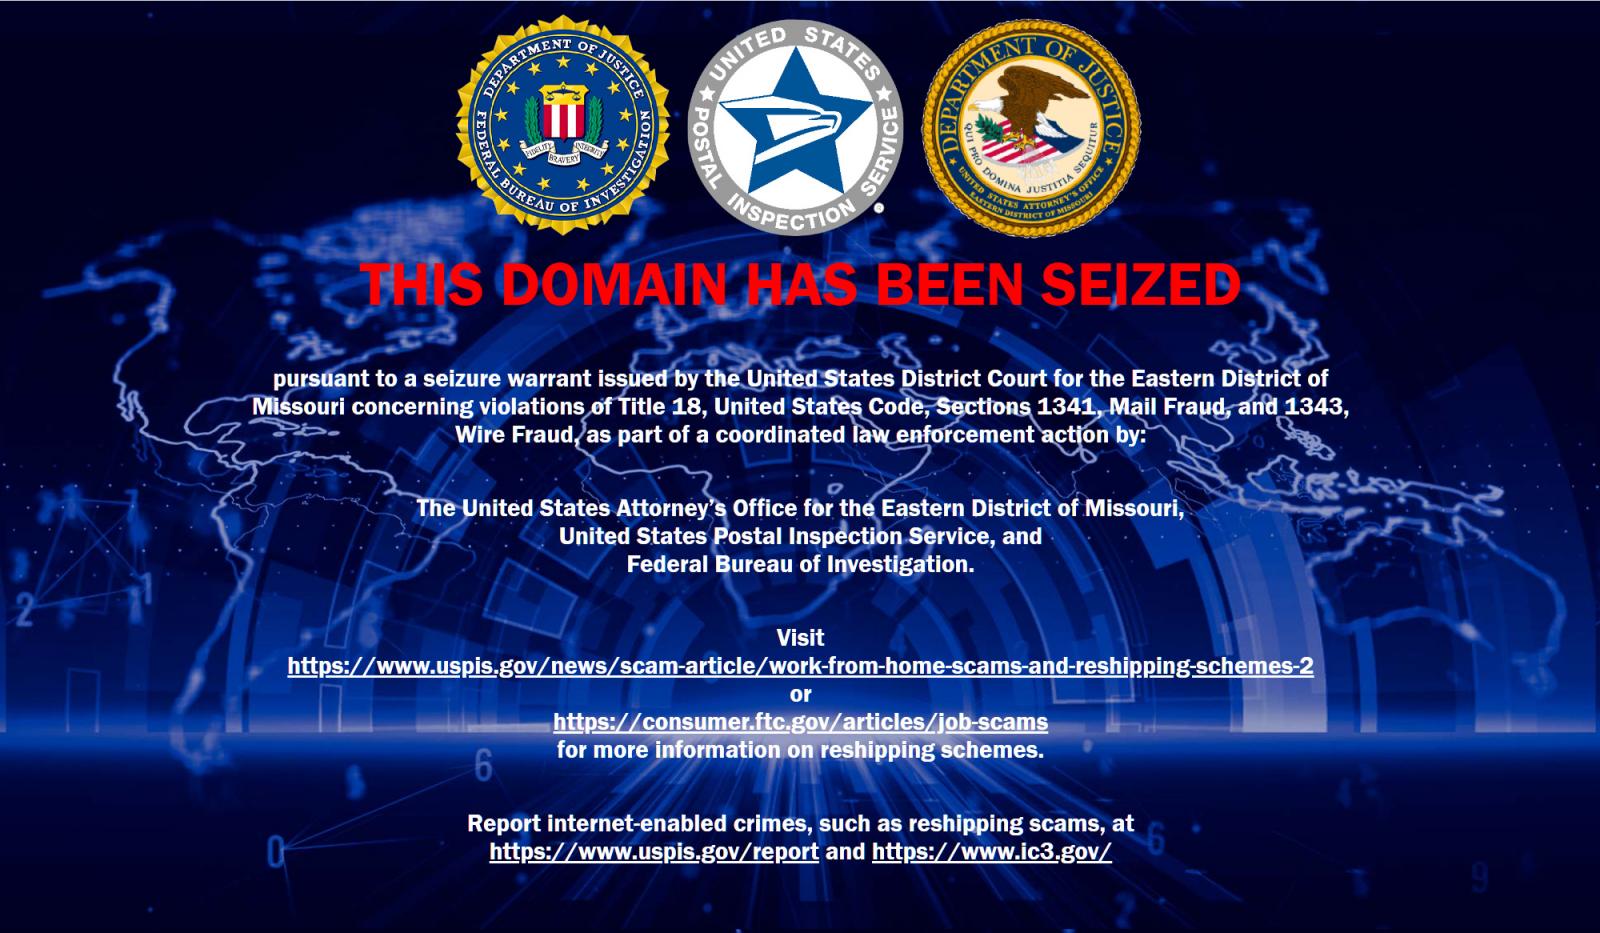 Seizure notice on the domains